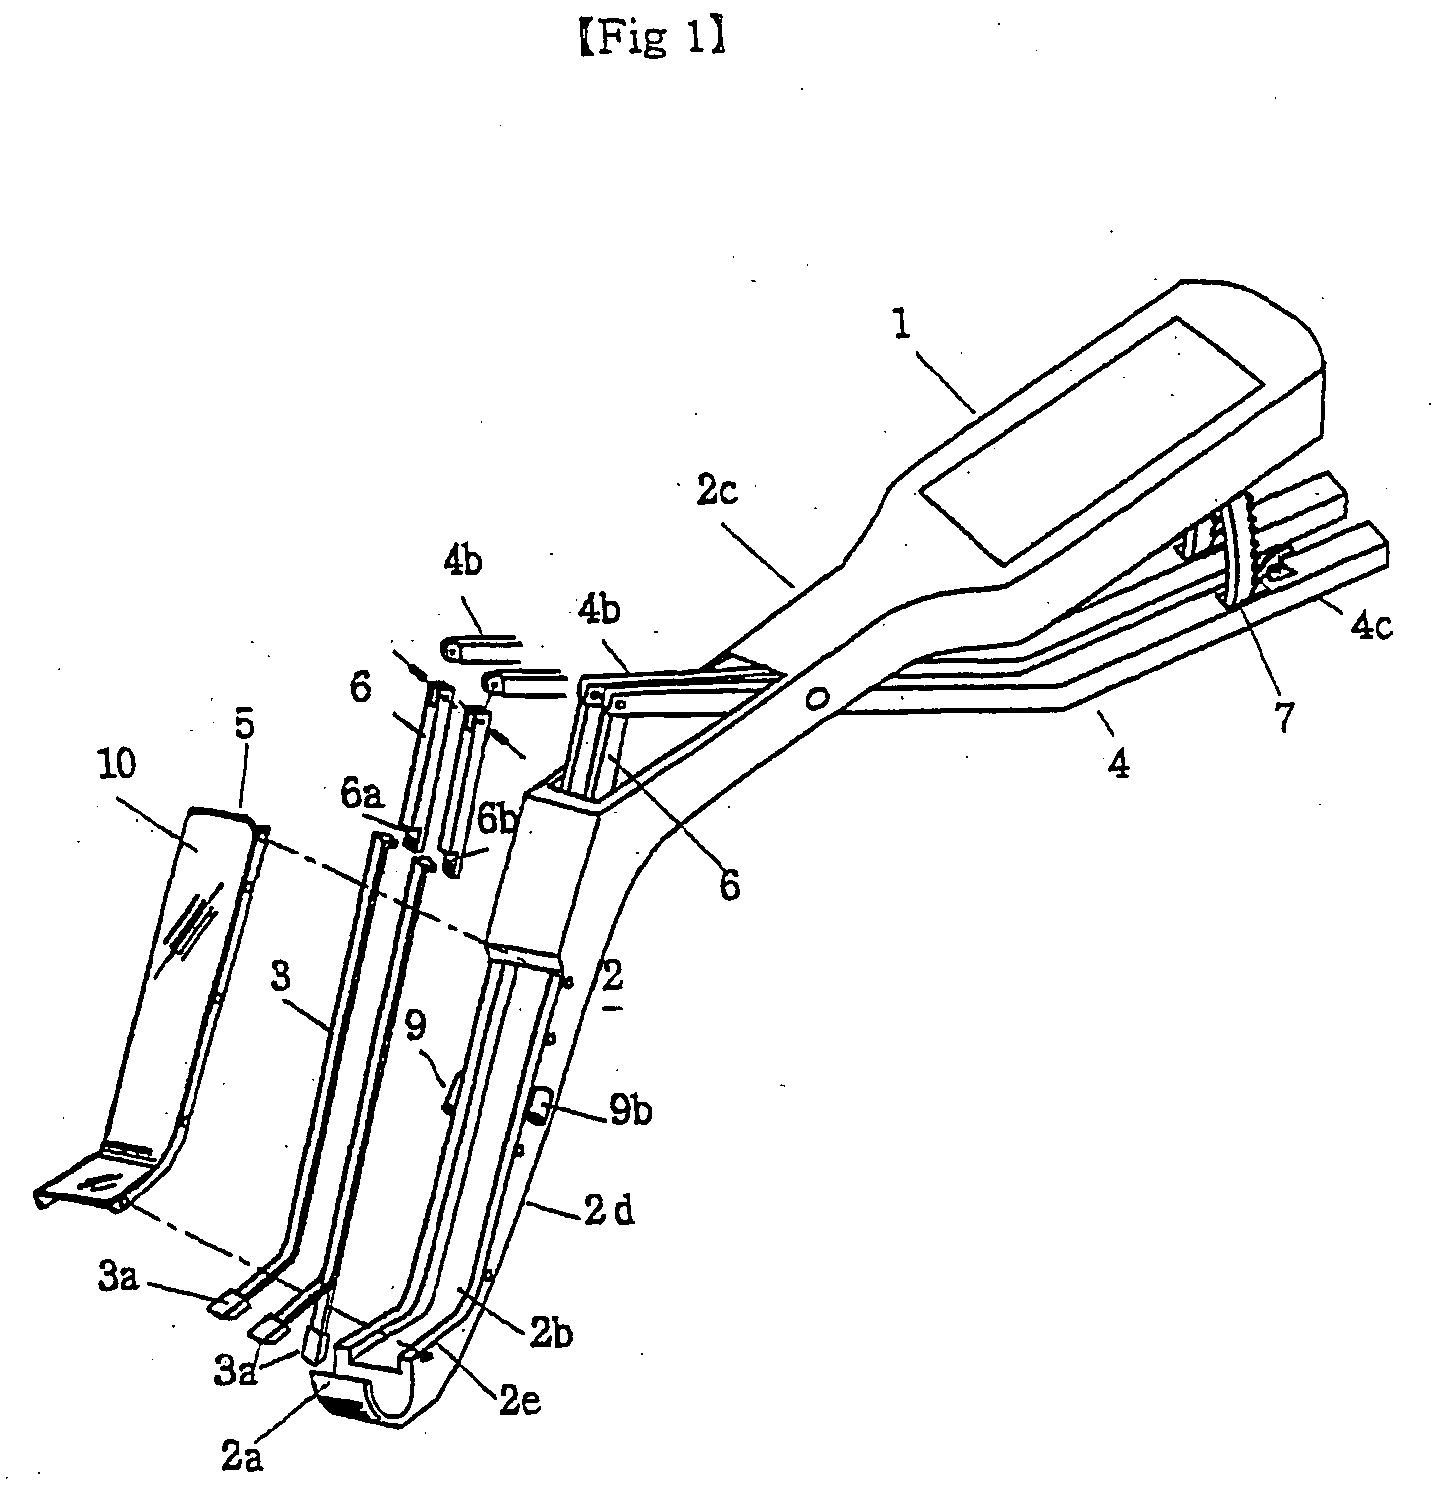 Surgical method for mandibular angle fracture operation and devices therefor